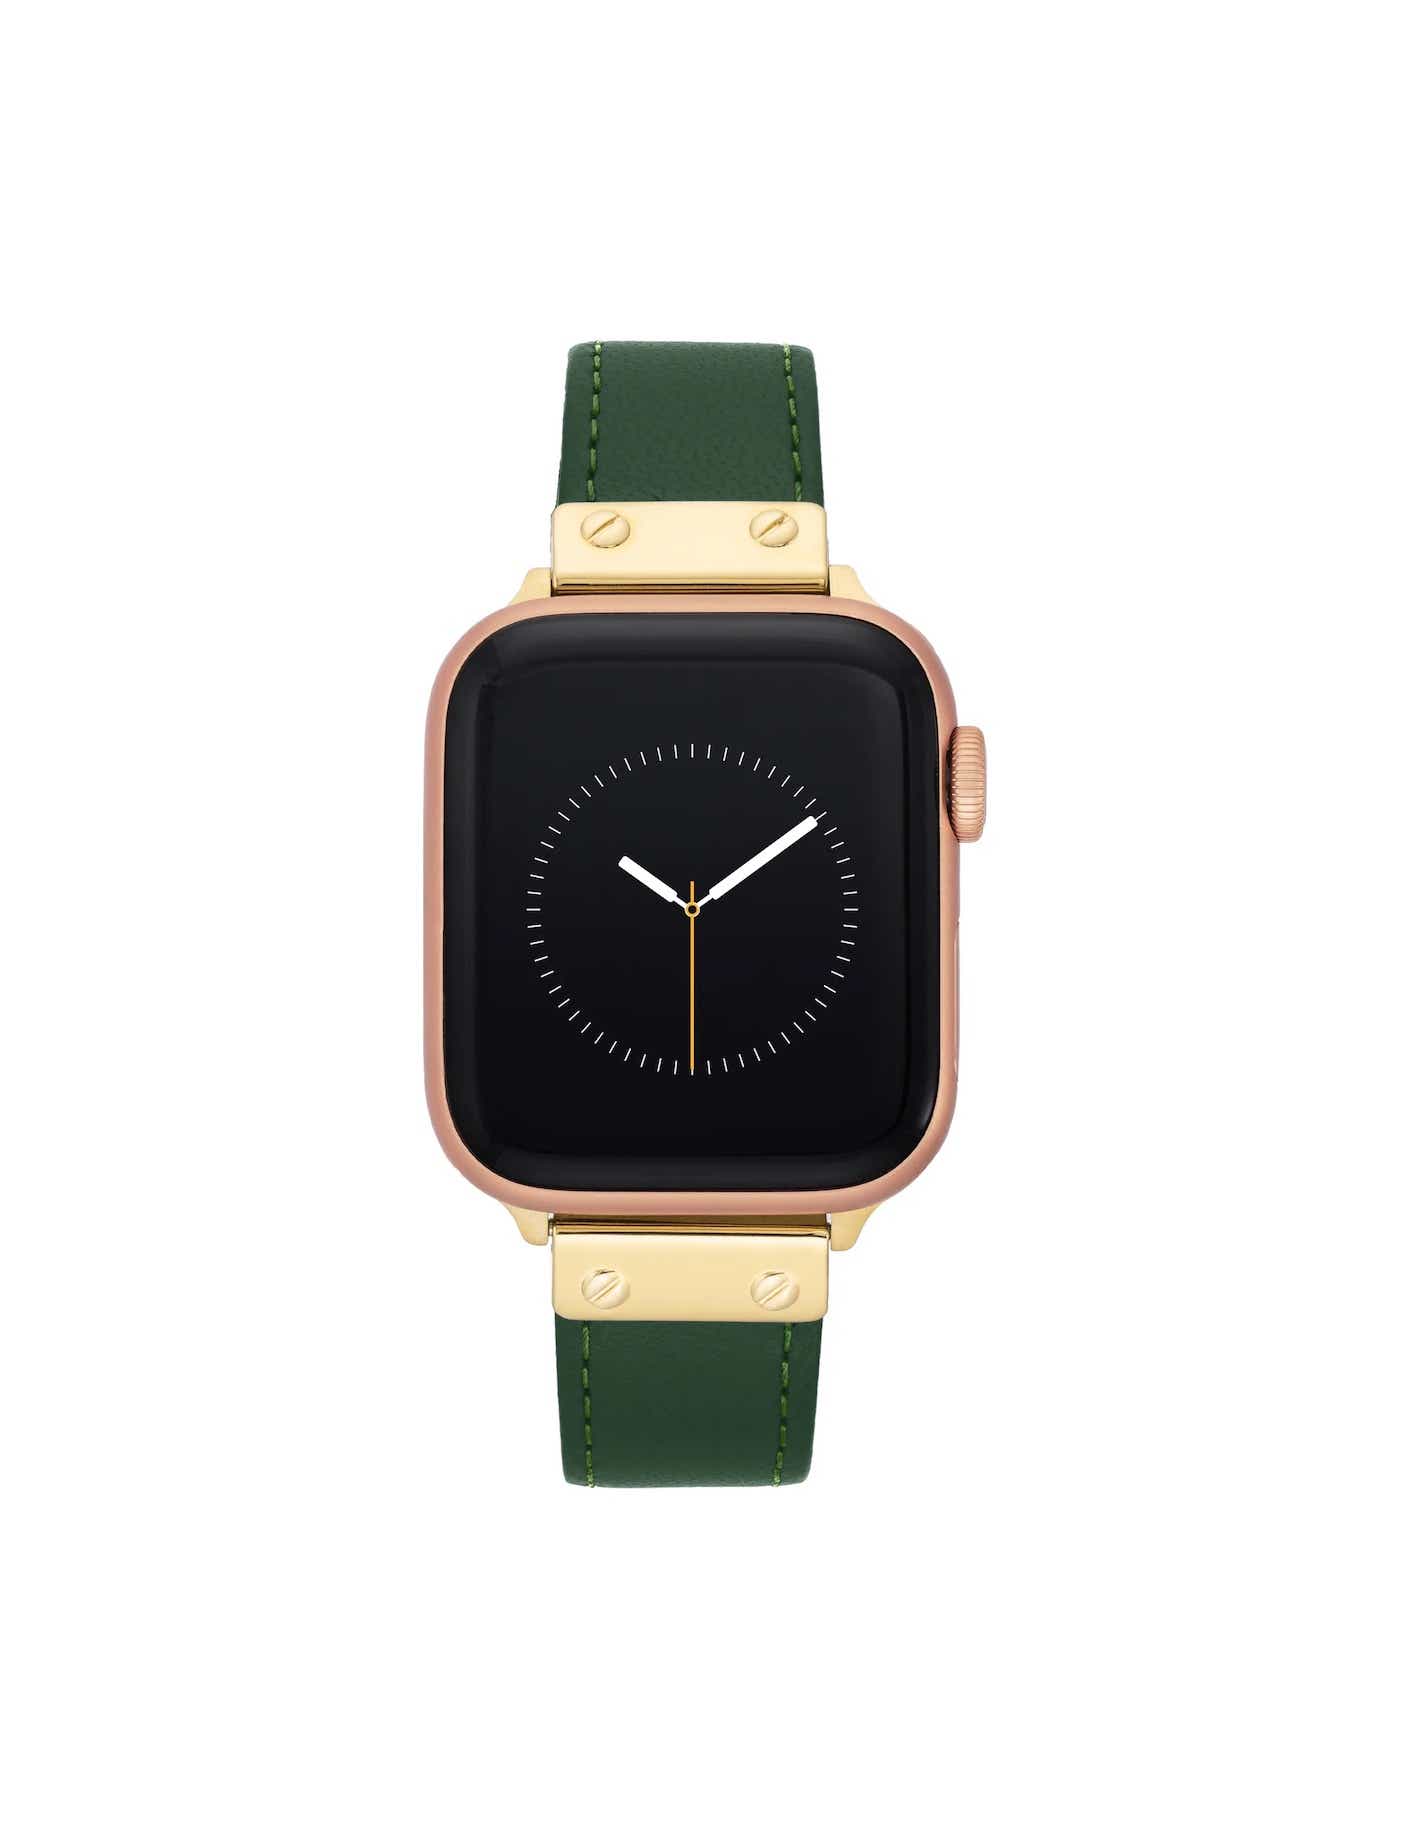 An Apple Watch band in green